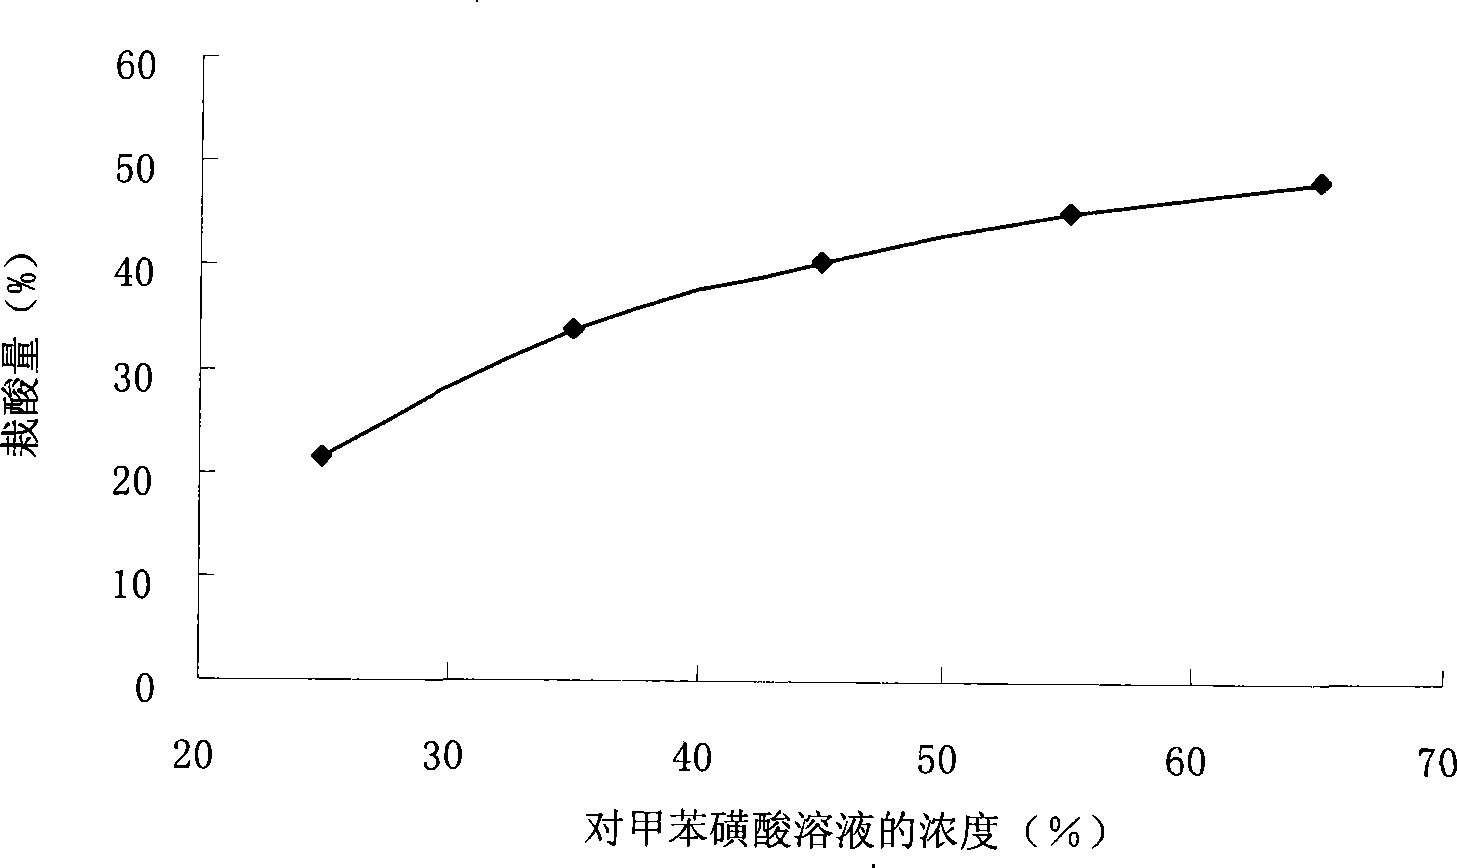 Process for producing pentaerythritol oleate